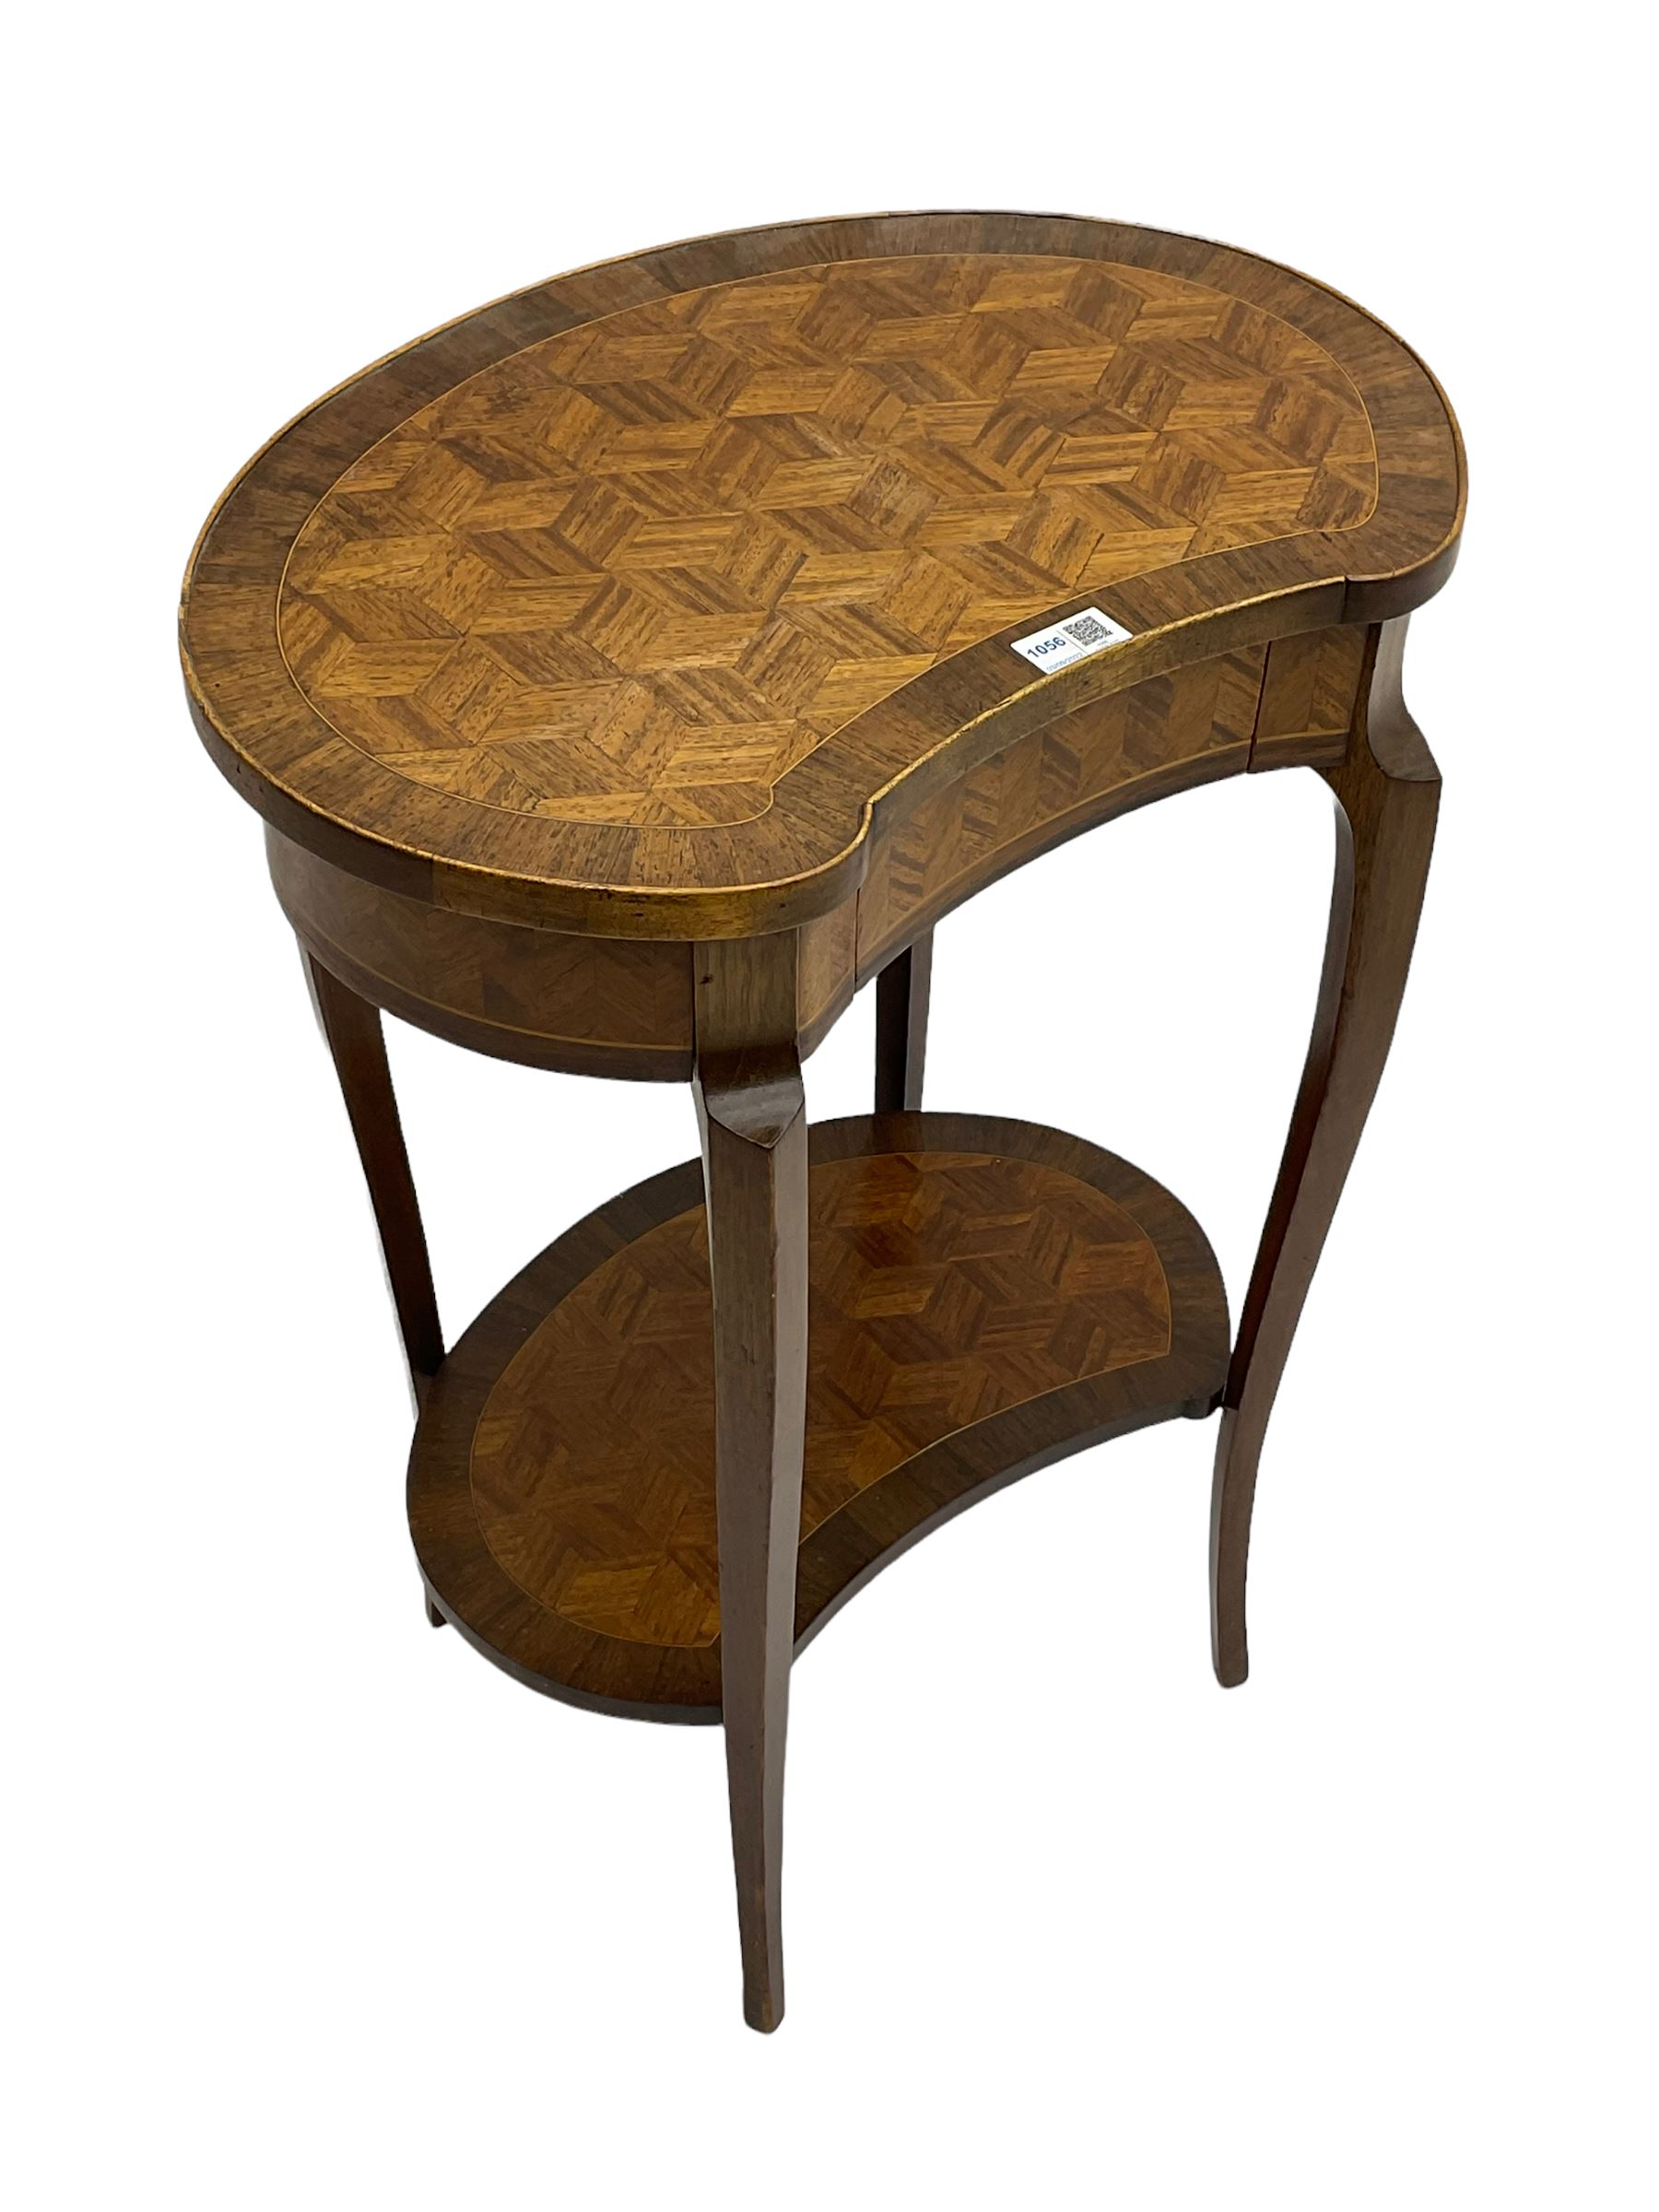 French style walnut parquetry kidney shaped table - Image 2 of 5